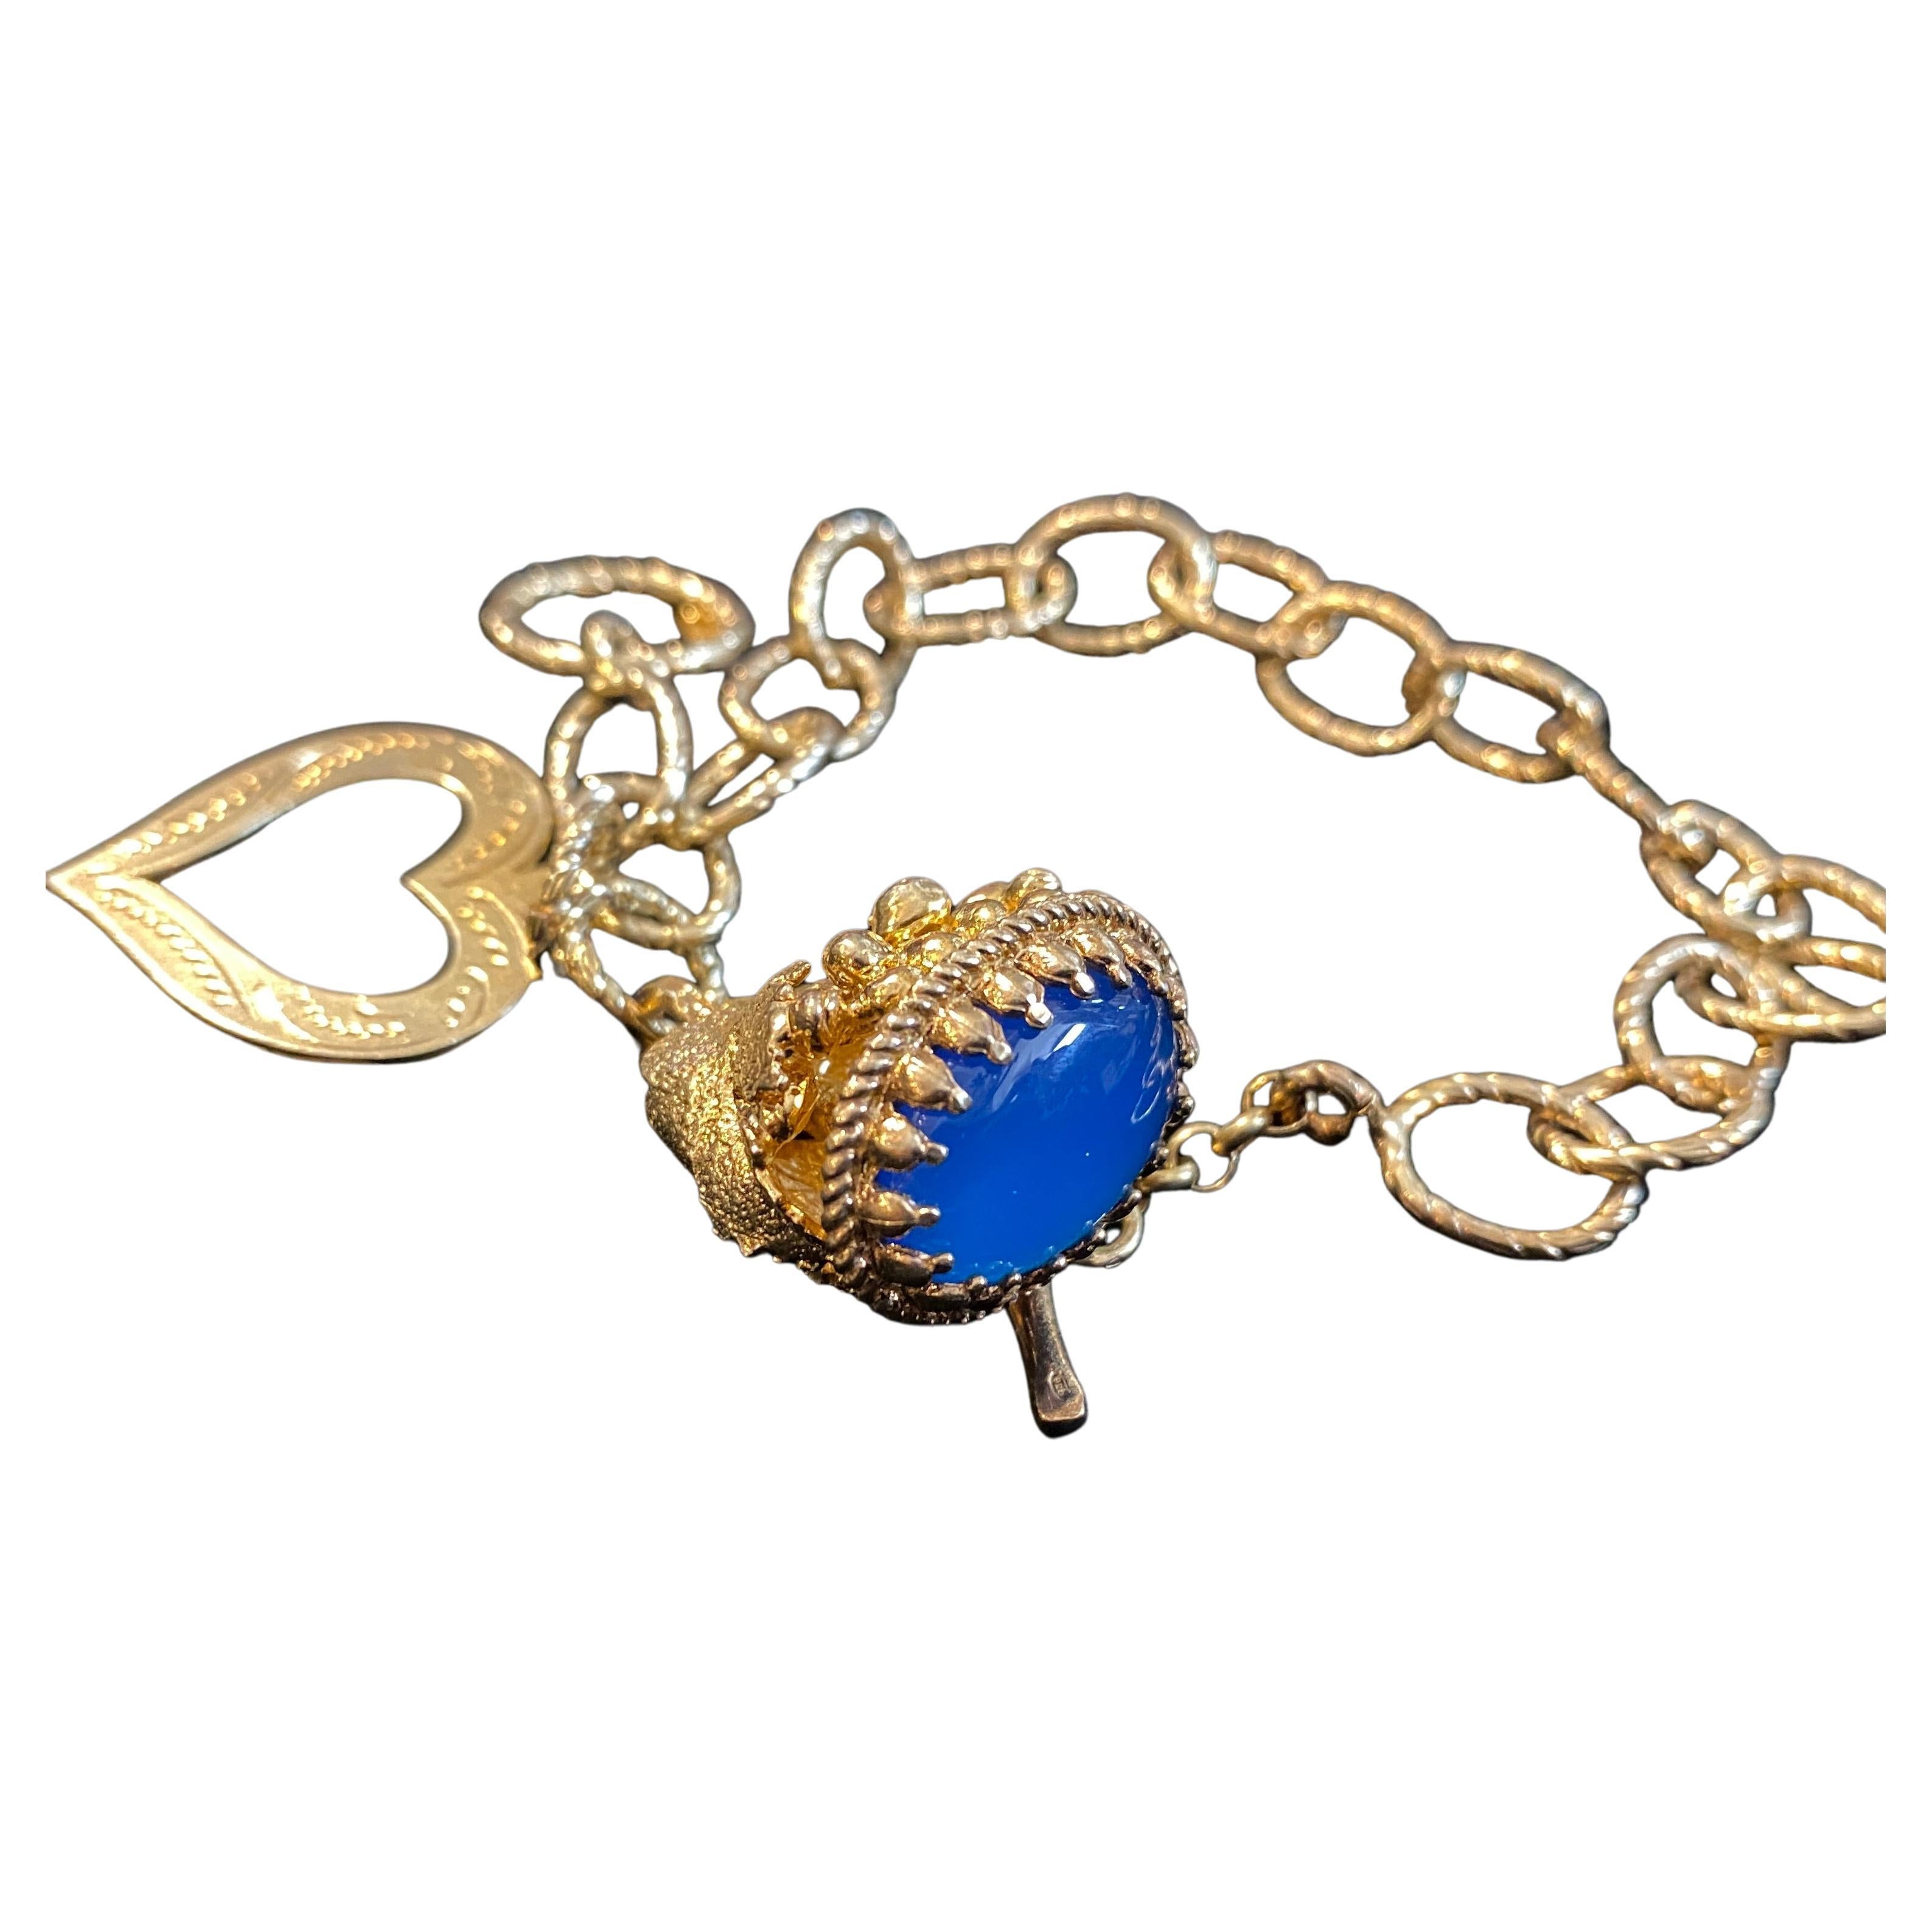 1990s Vintage Gilded Bronze and Blue Agate Italian Charm Bracelet by Anomis For Sale